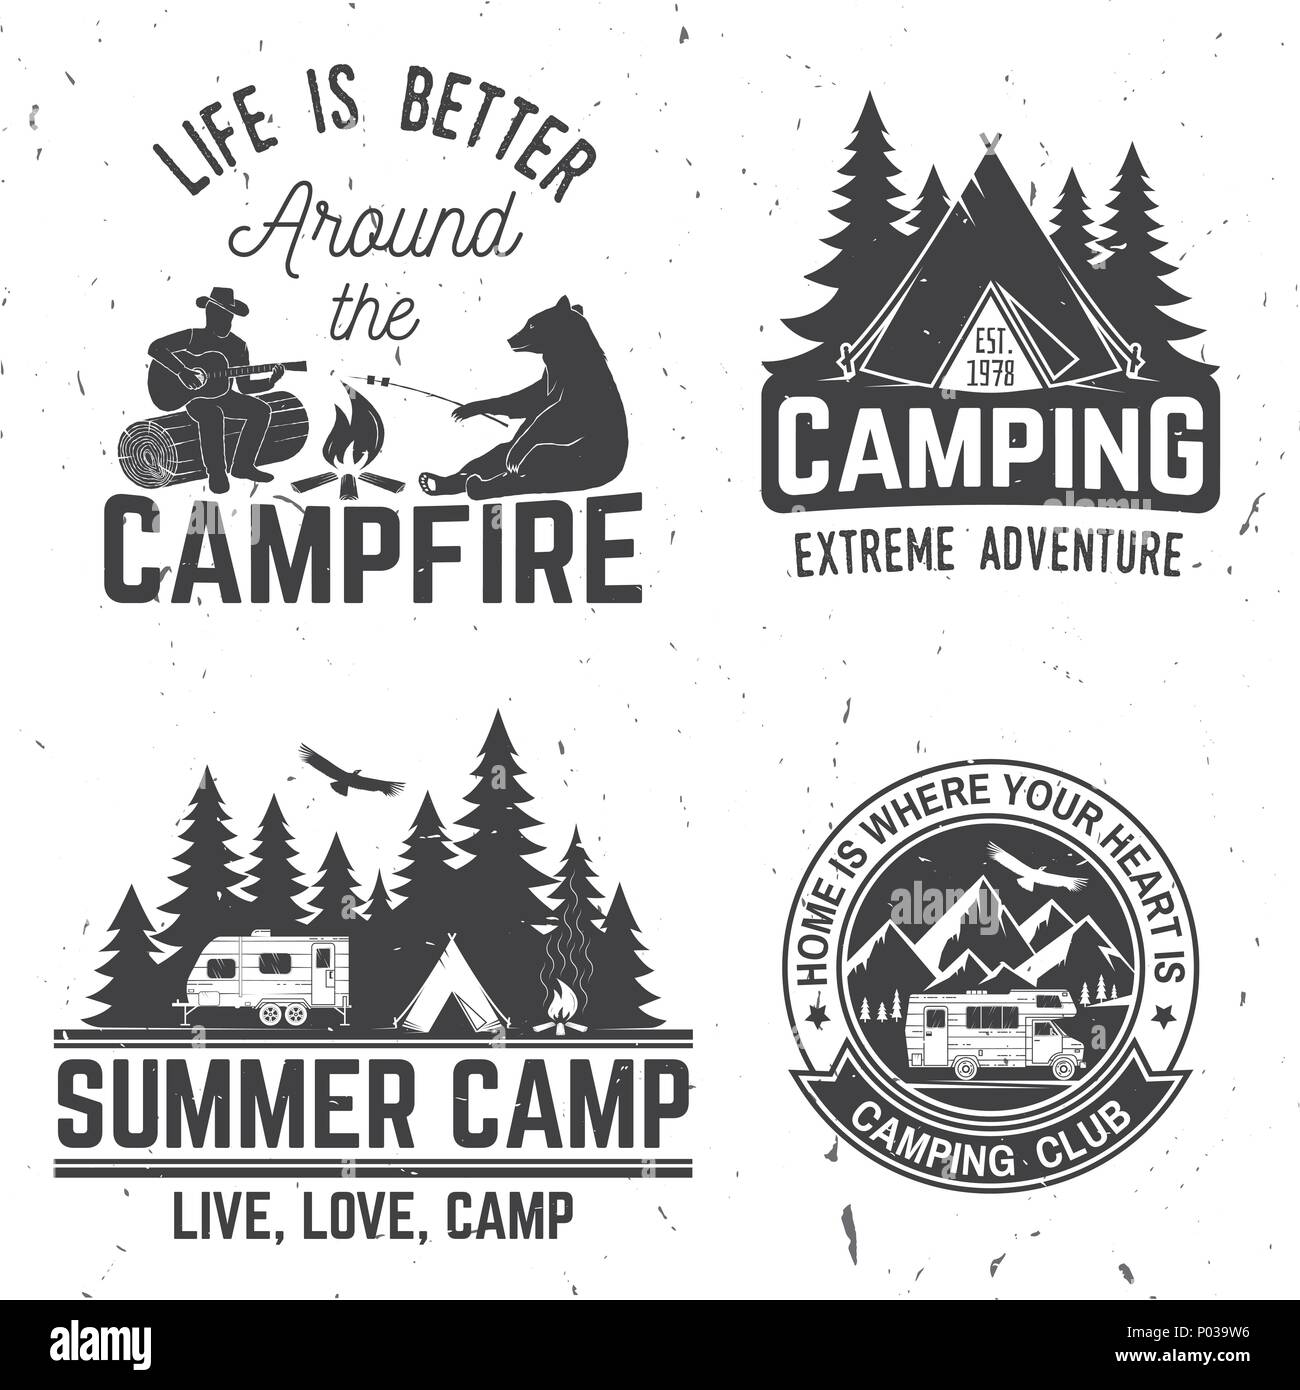 Summer camp. Vector illustration. Concept for shirt or logo, print, stamp or tee. Vintage typography design with rv trailer, camping tent, campfire, b Stock Vector